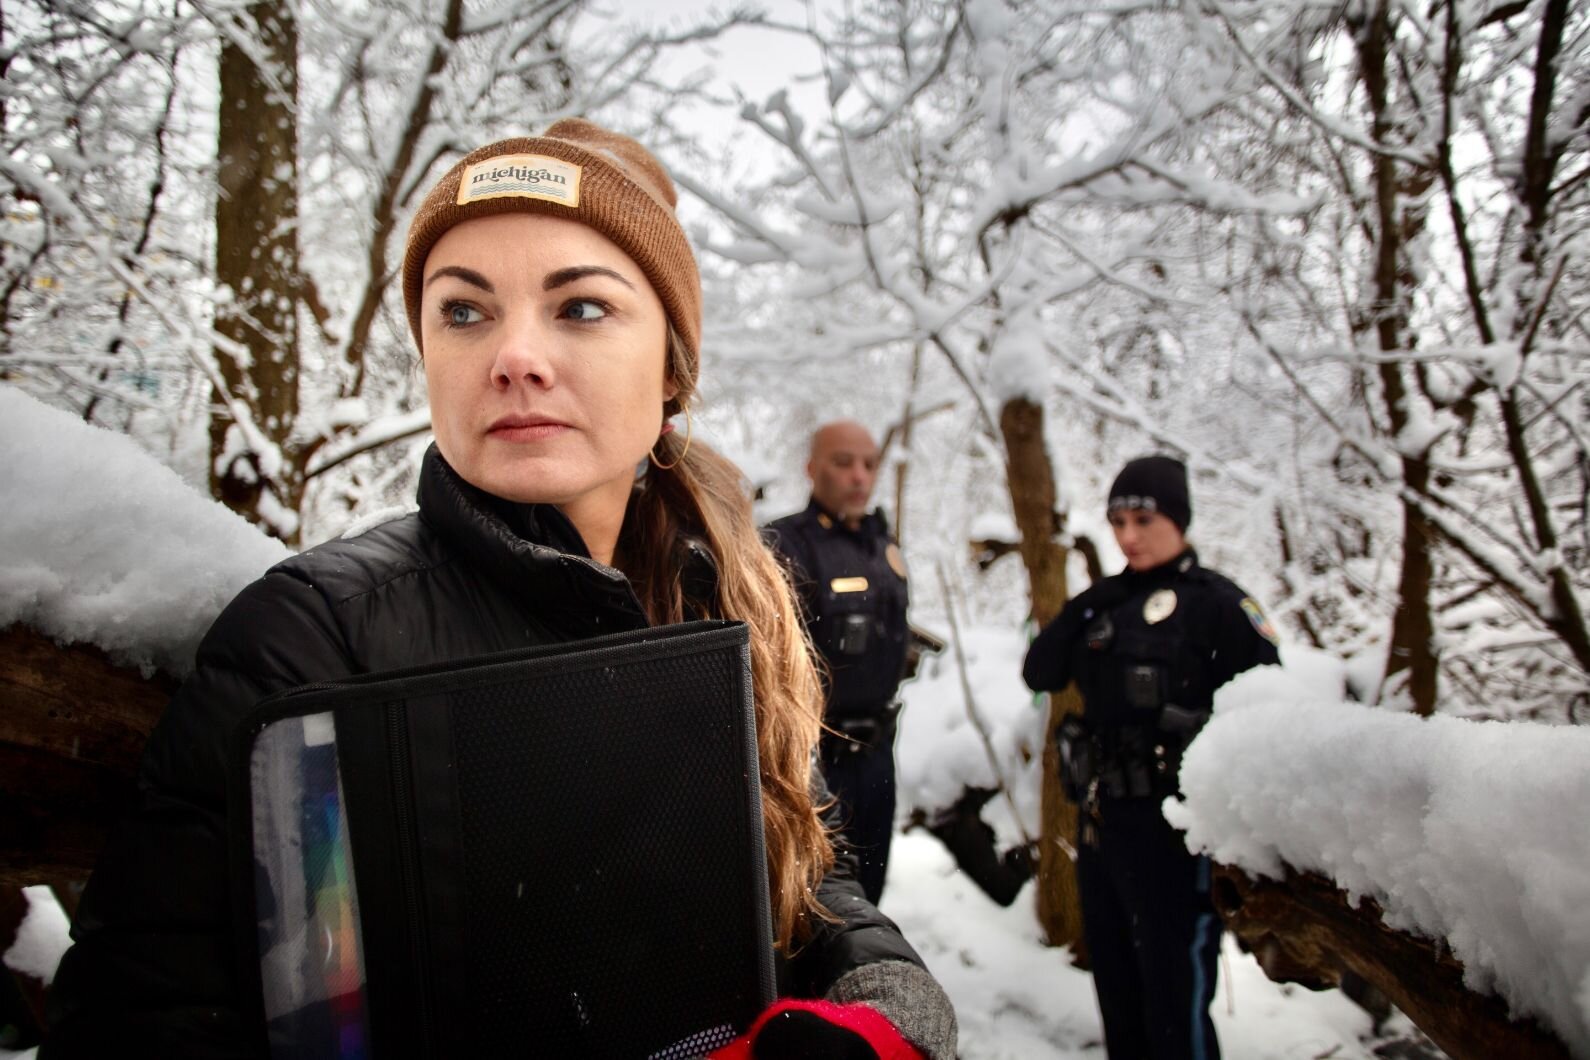 Kelsey Harness, social services coordinator for Kalamazoo Public Safety's new Community Service Team, looks around a wooded area where unhoused people  camped until recently east of downtown Kalamazoo.